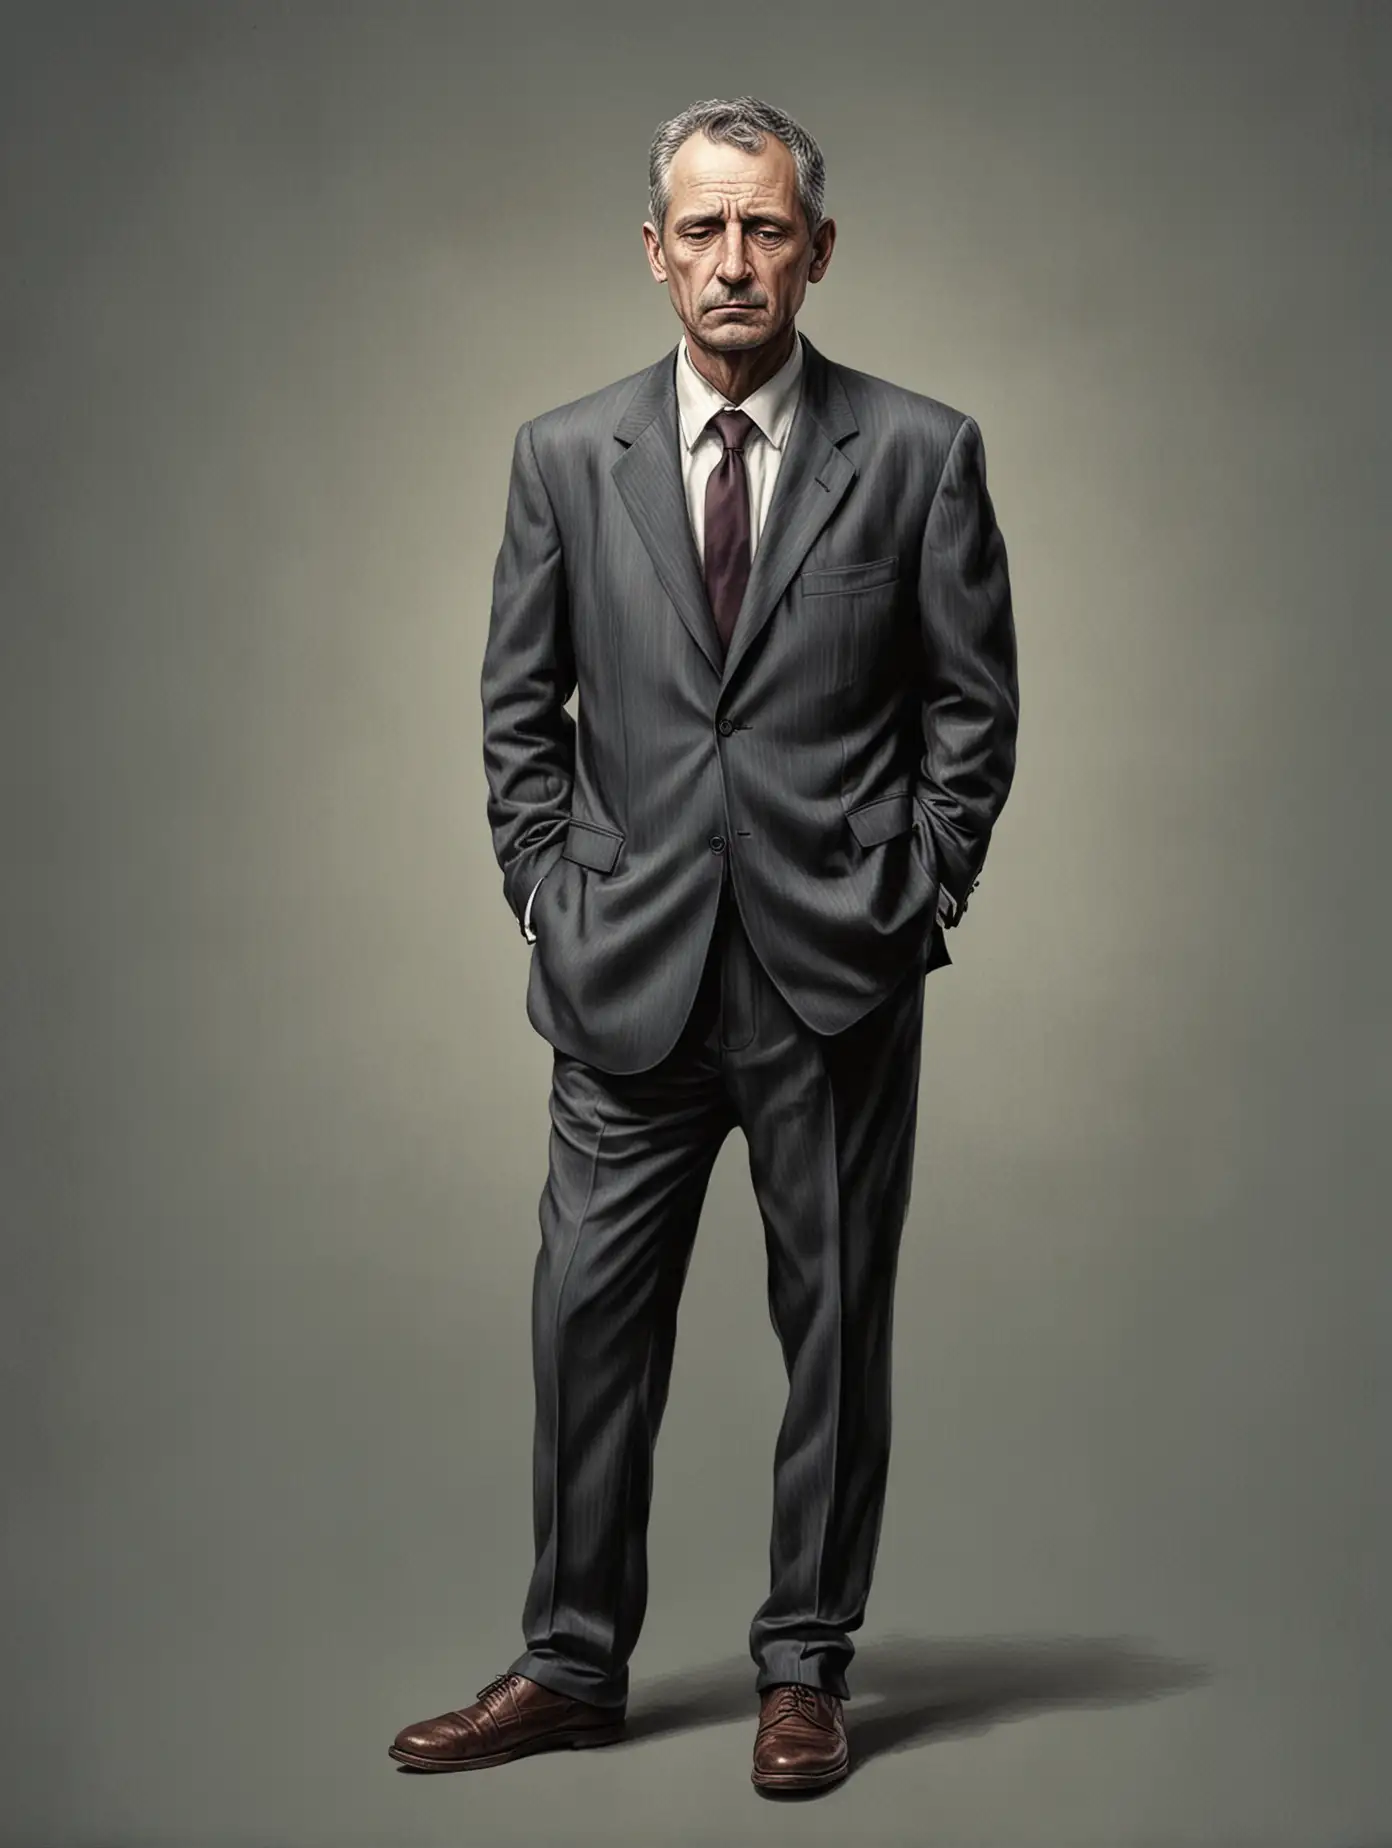 Lonely MiddleAged Man in a Suit Looking Tired